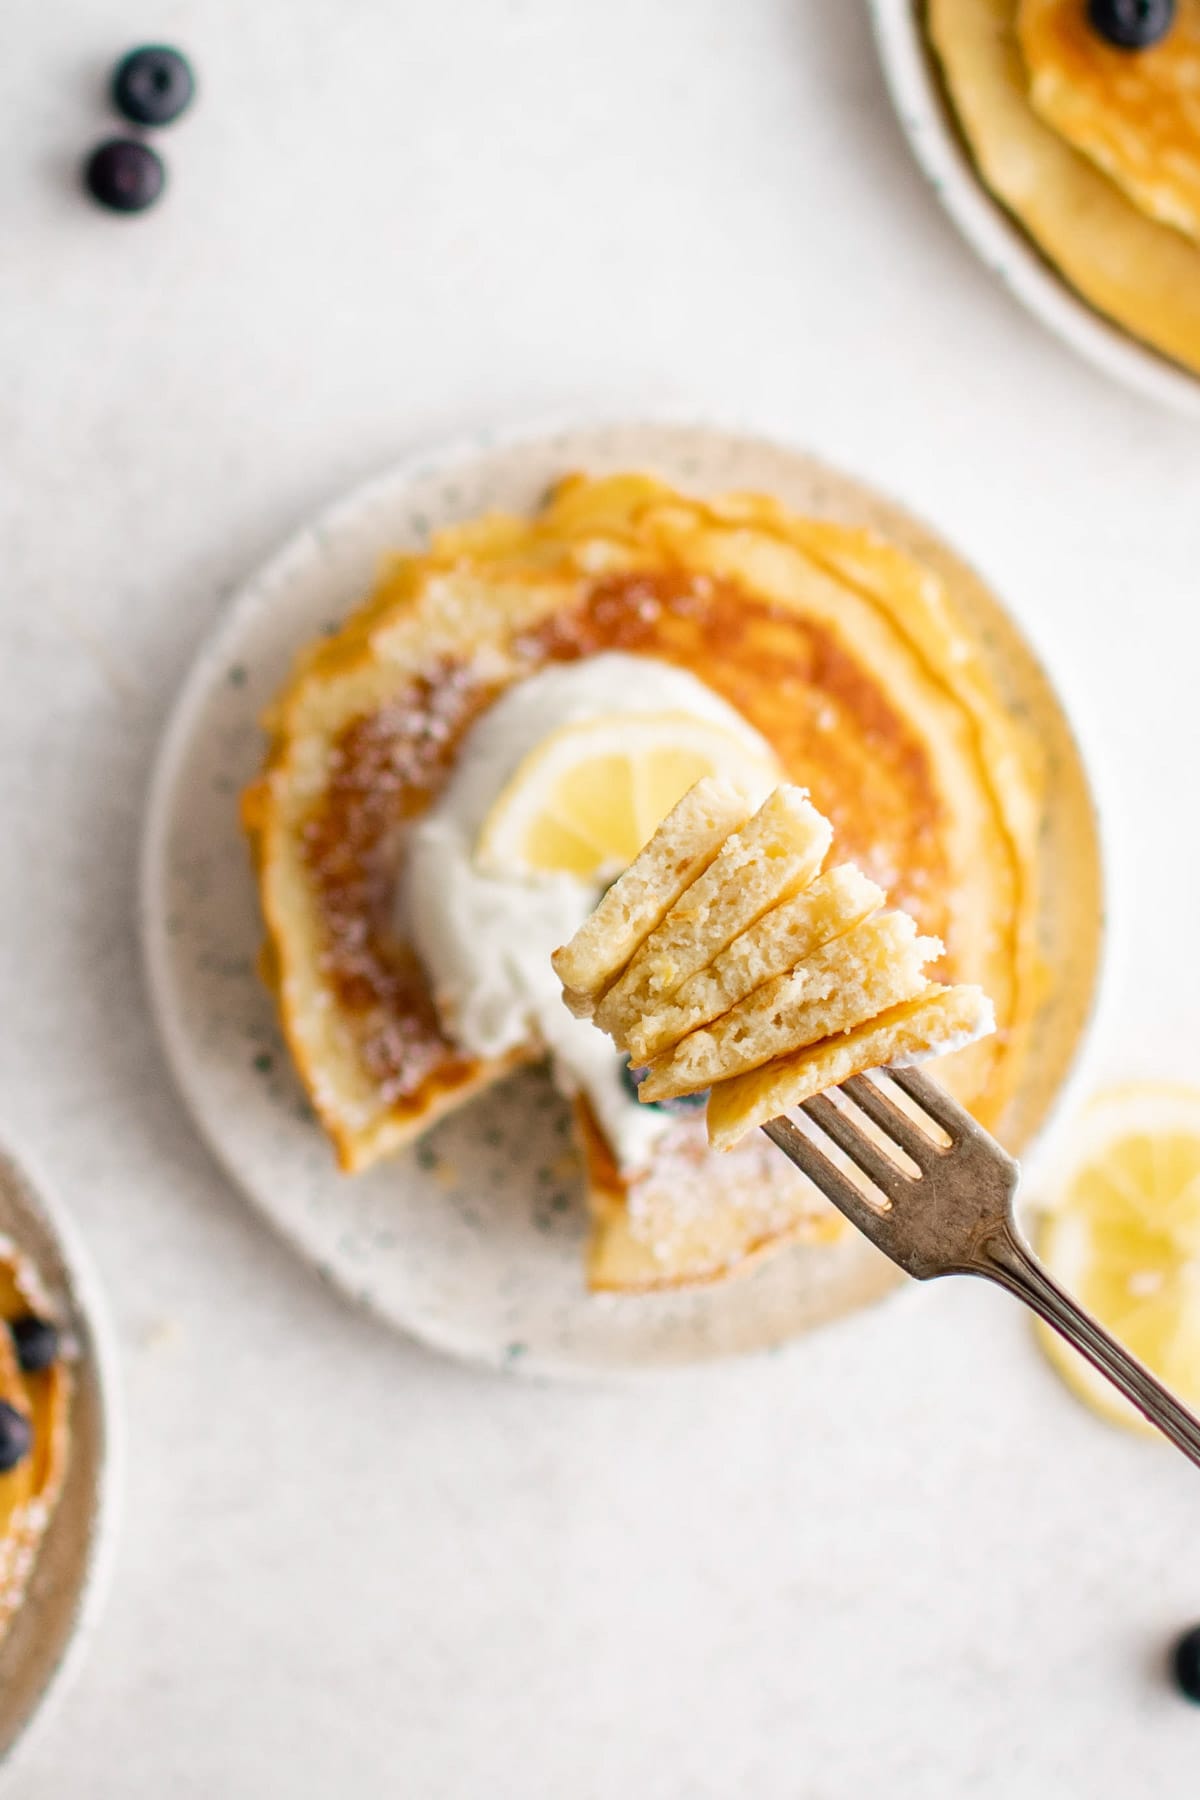 Lemon Pancakes with whipped cream and lemon zest, a fork with a cut bite of stacked pancakes.